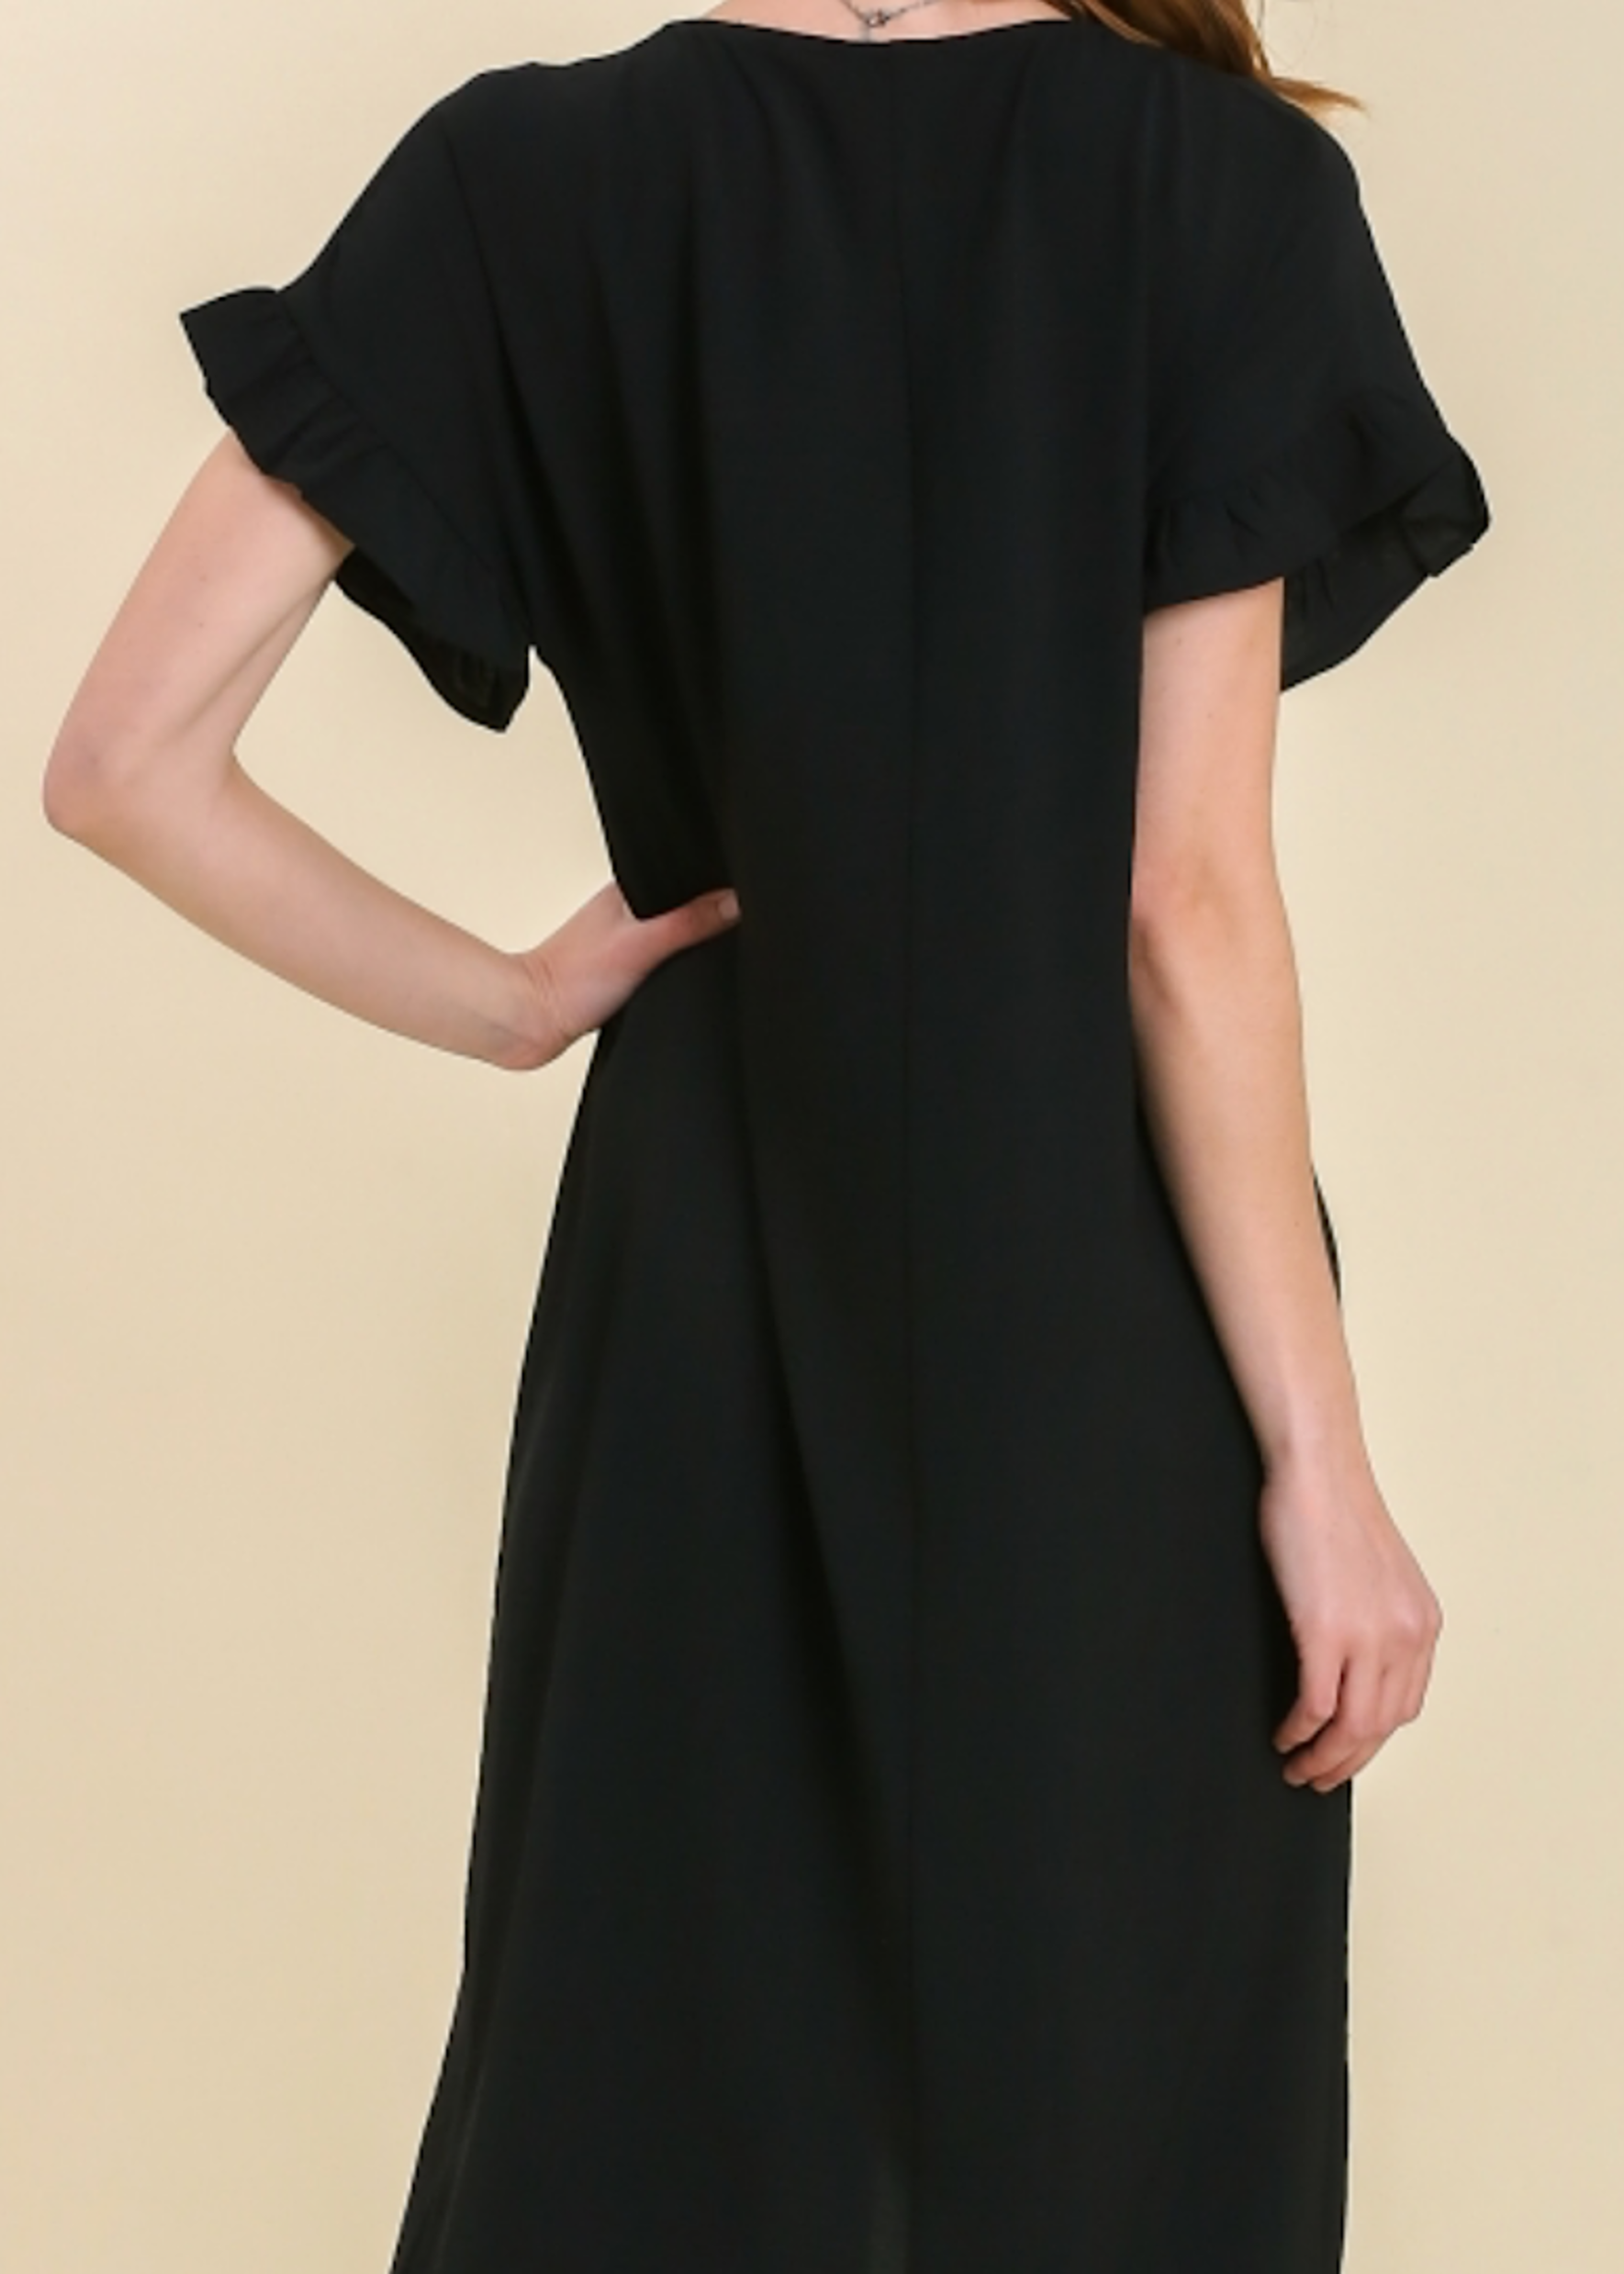 Black V-Neck Ruffle Sleeve Dress With Front Tie